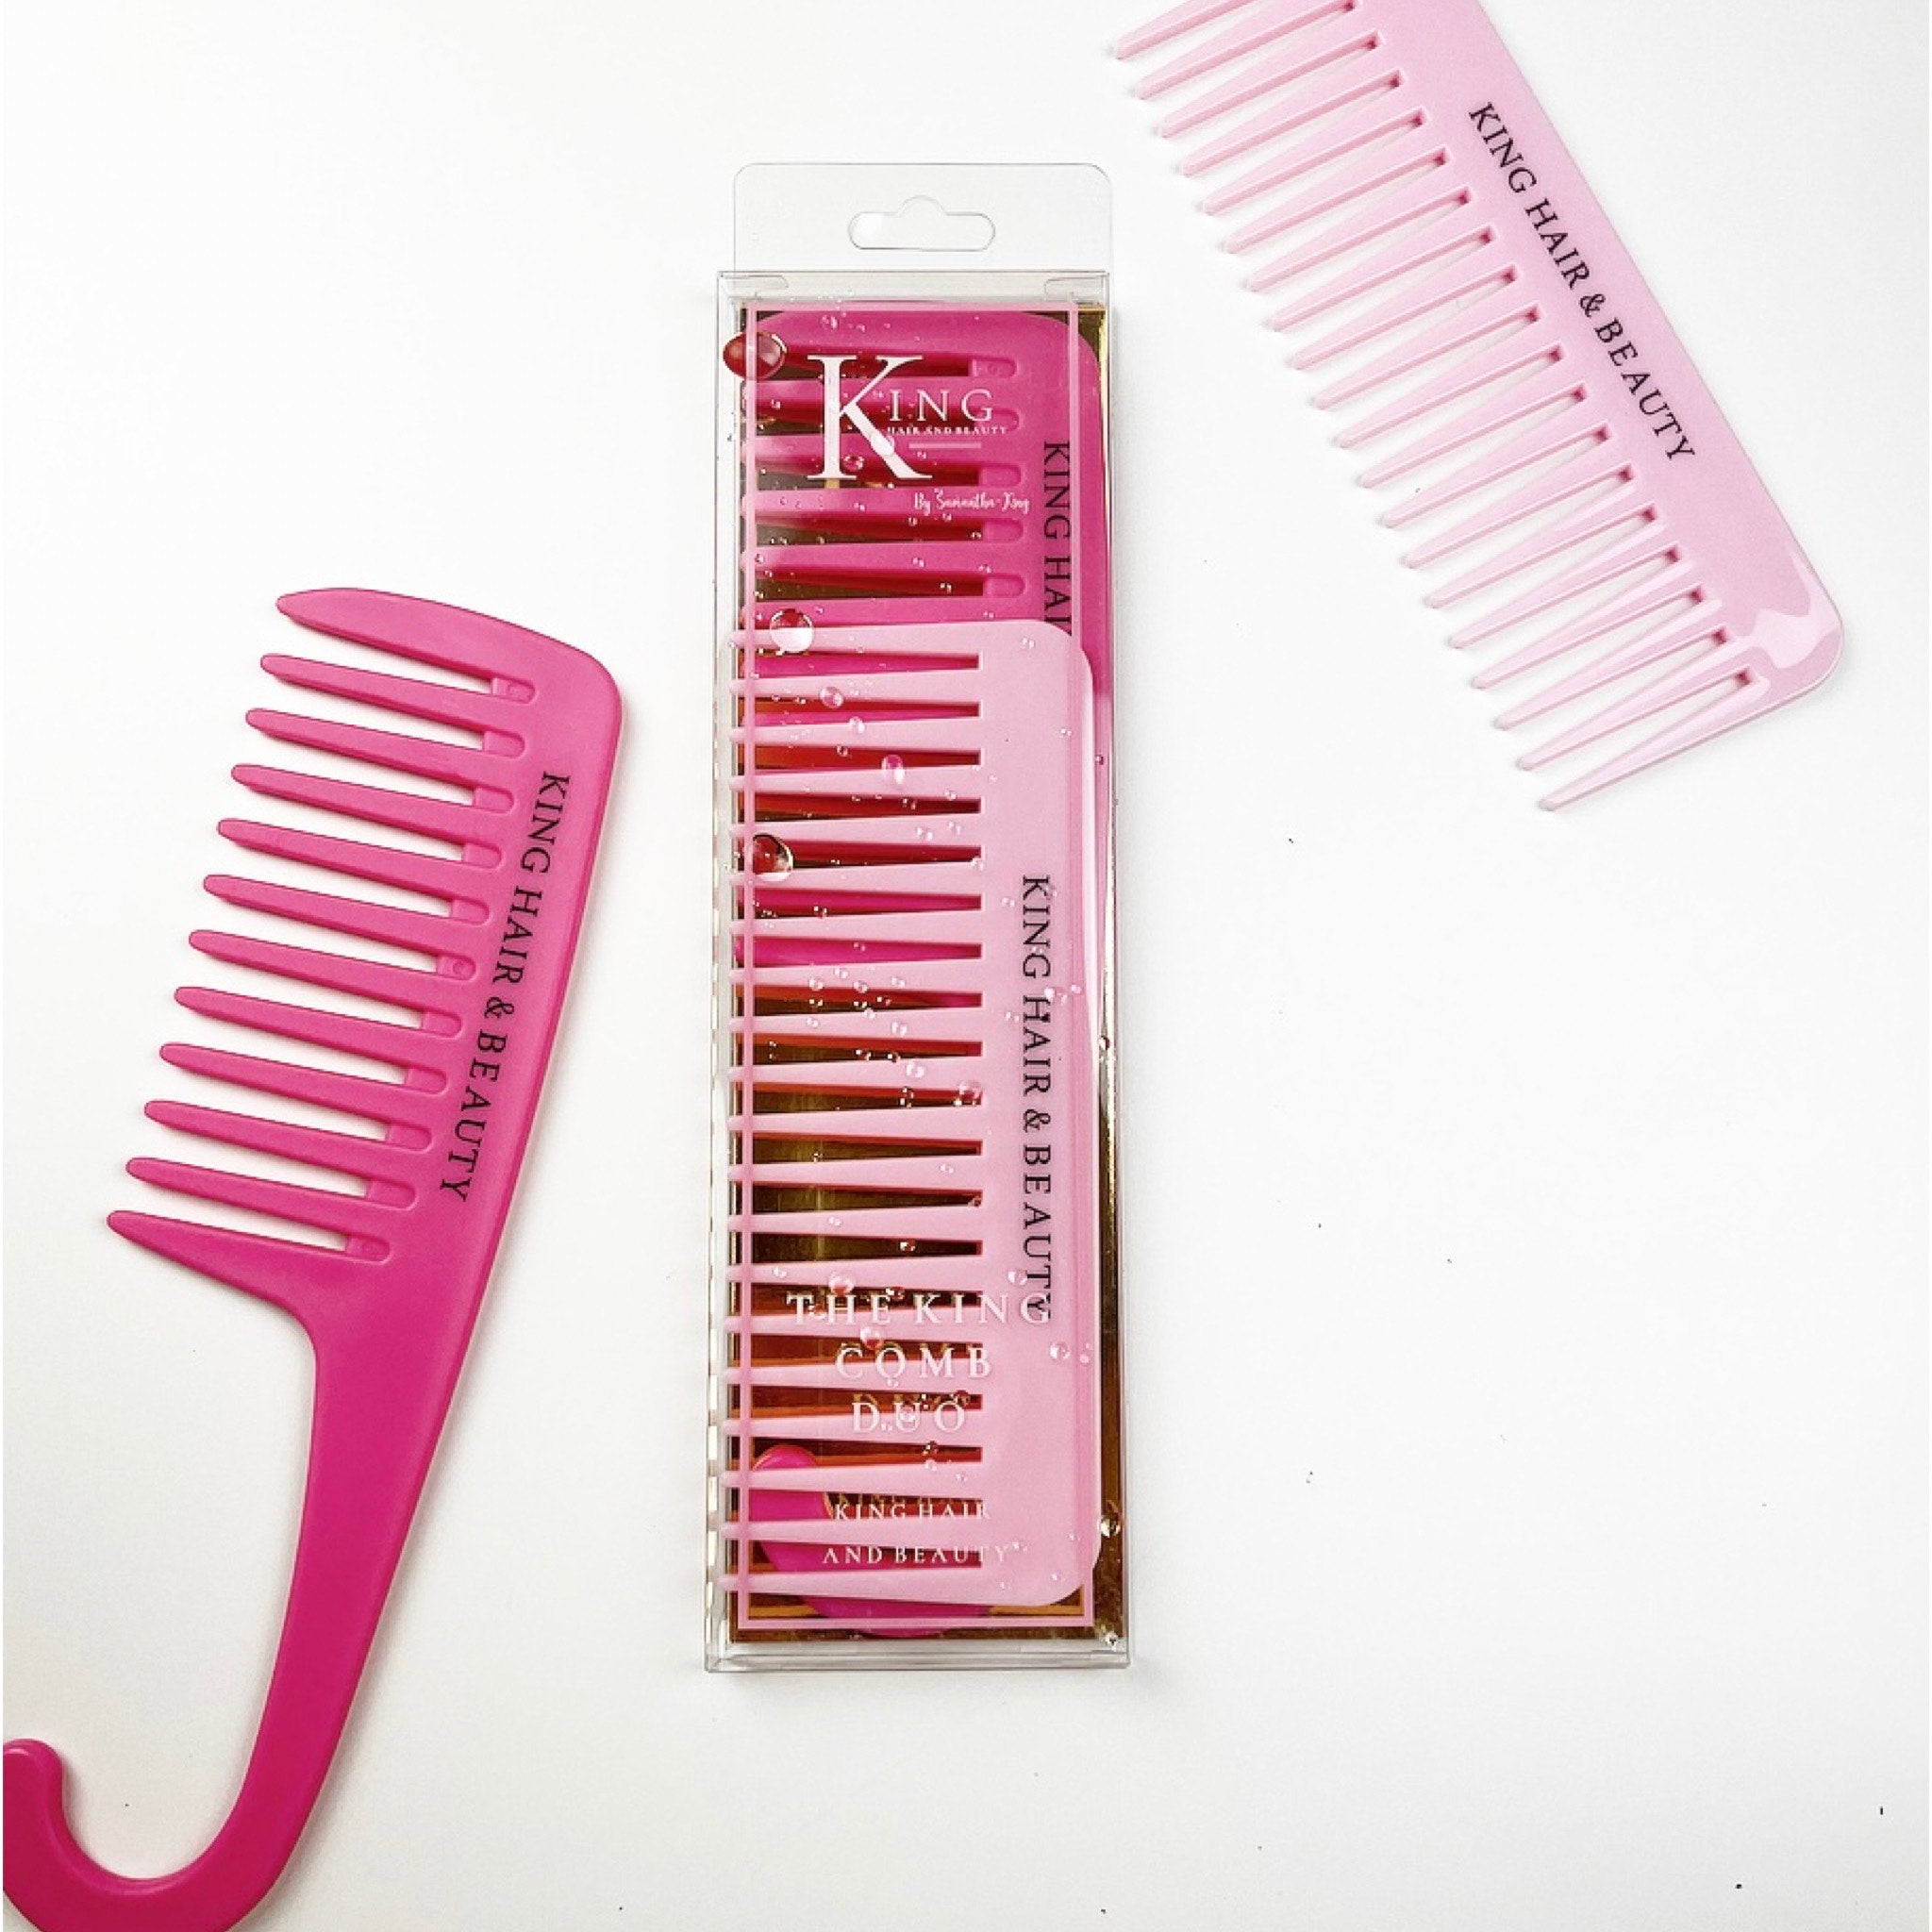 King Curl Comb (Duo 6 Pack)